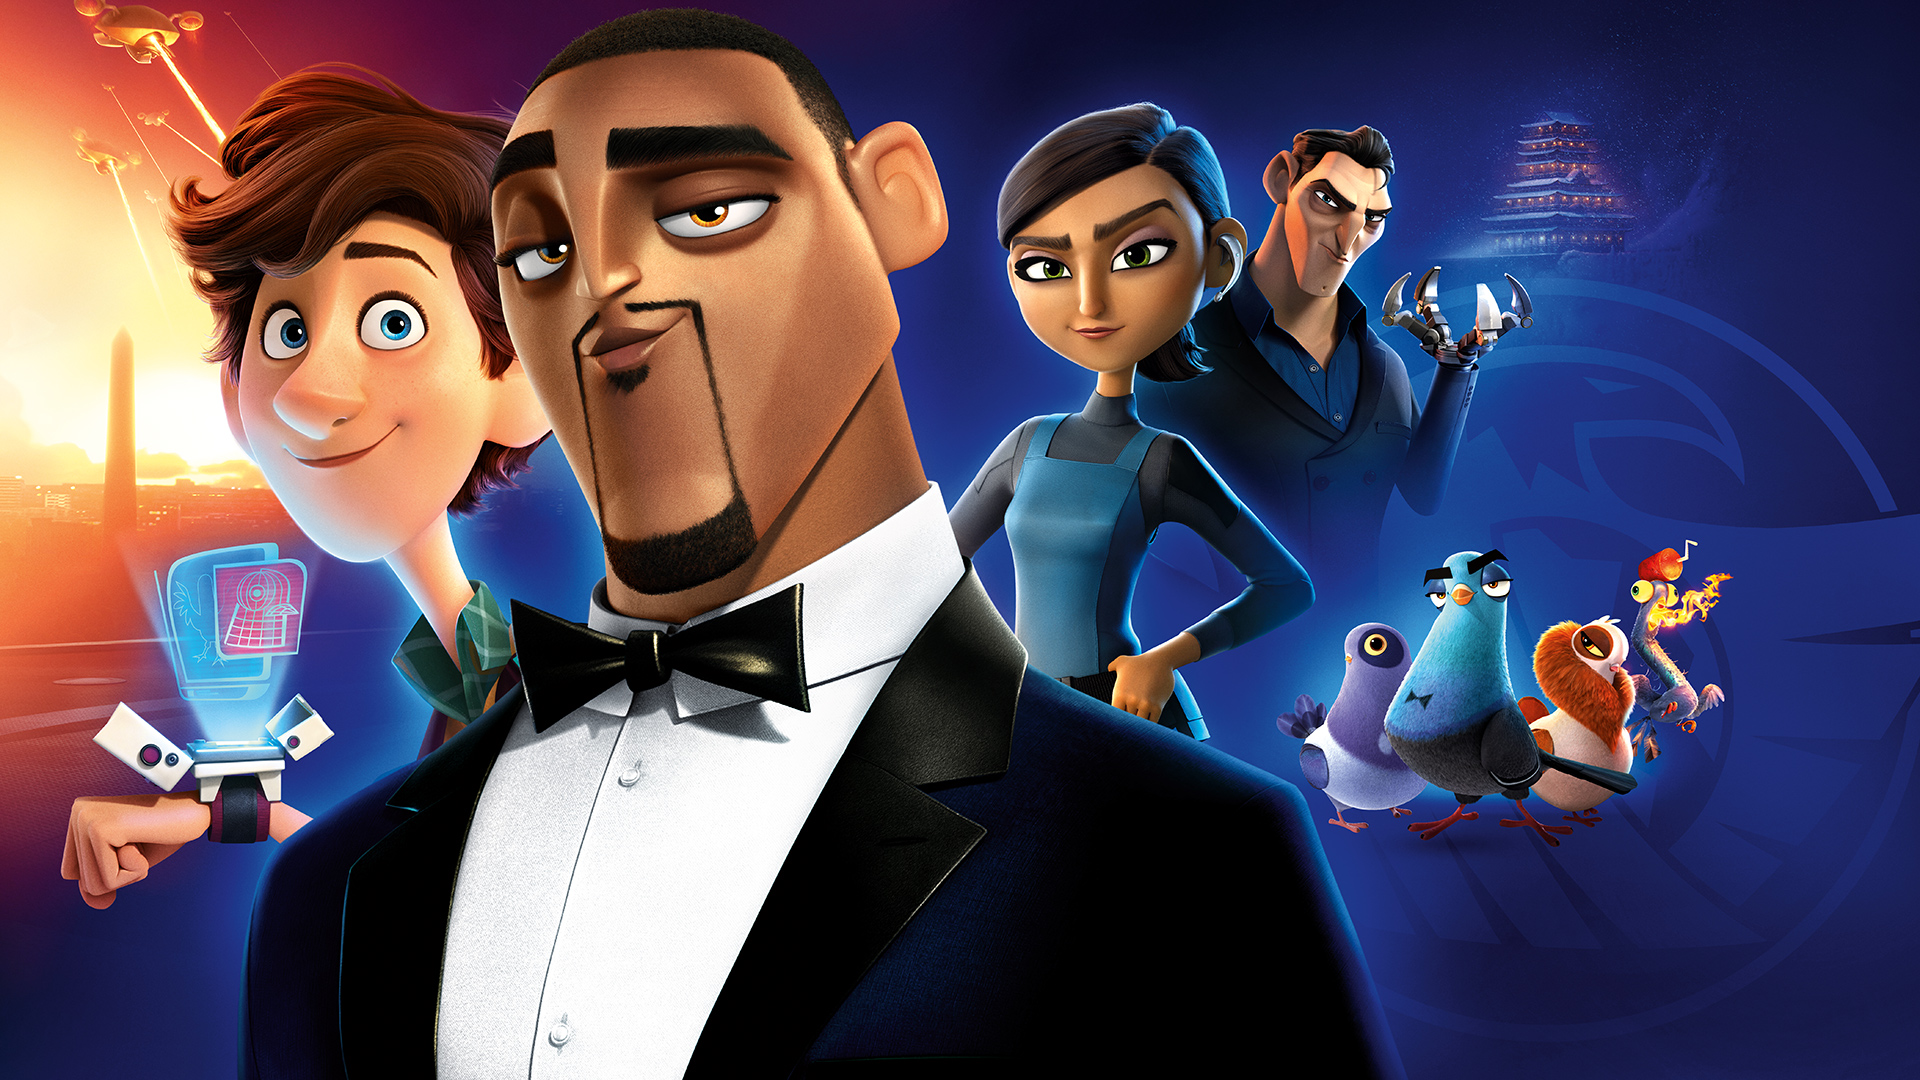 Spies In Disguise Movie Wallpaper - Spies In Disguise Movie - HD Wallpaper 